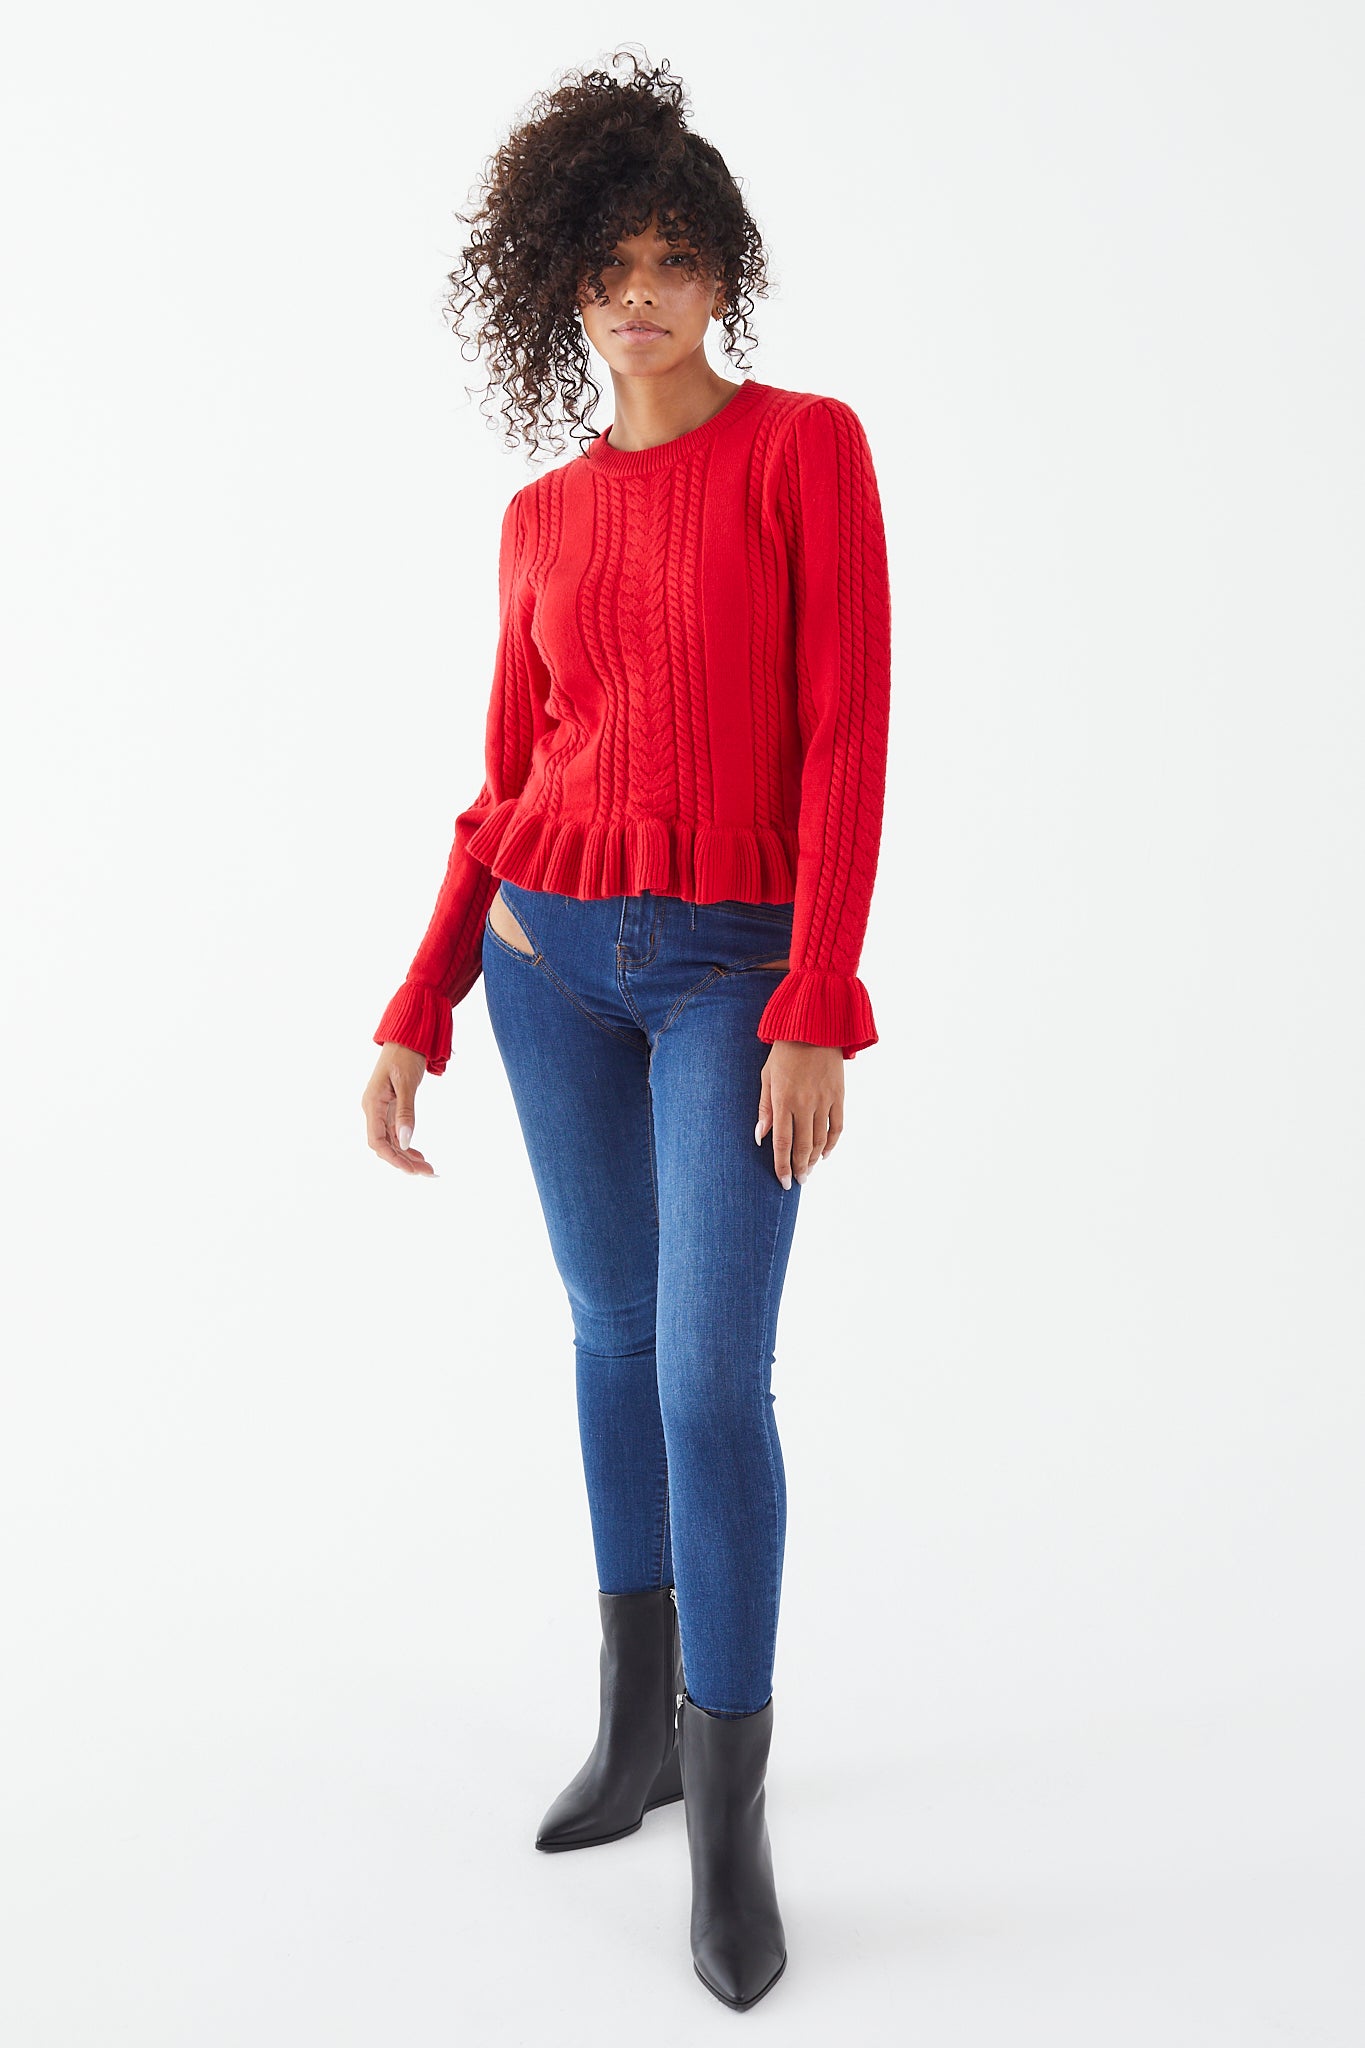 Bright Red Pepper Knit Ruffled Sweater womens clothing store